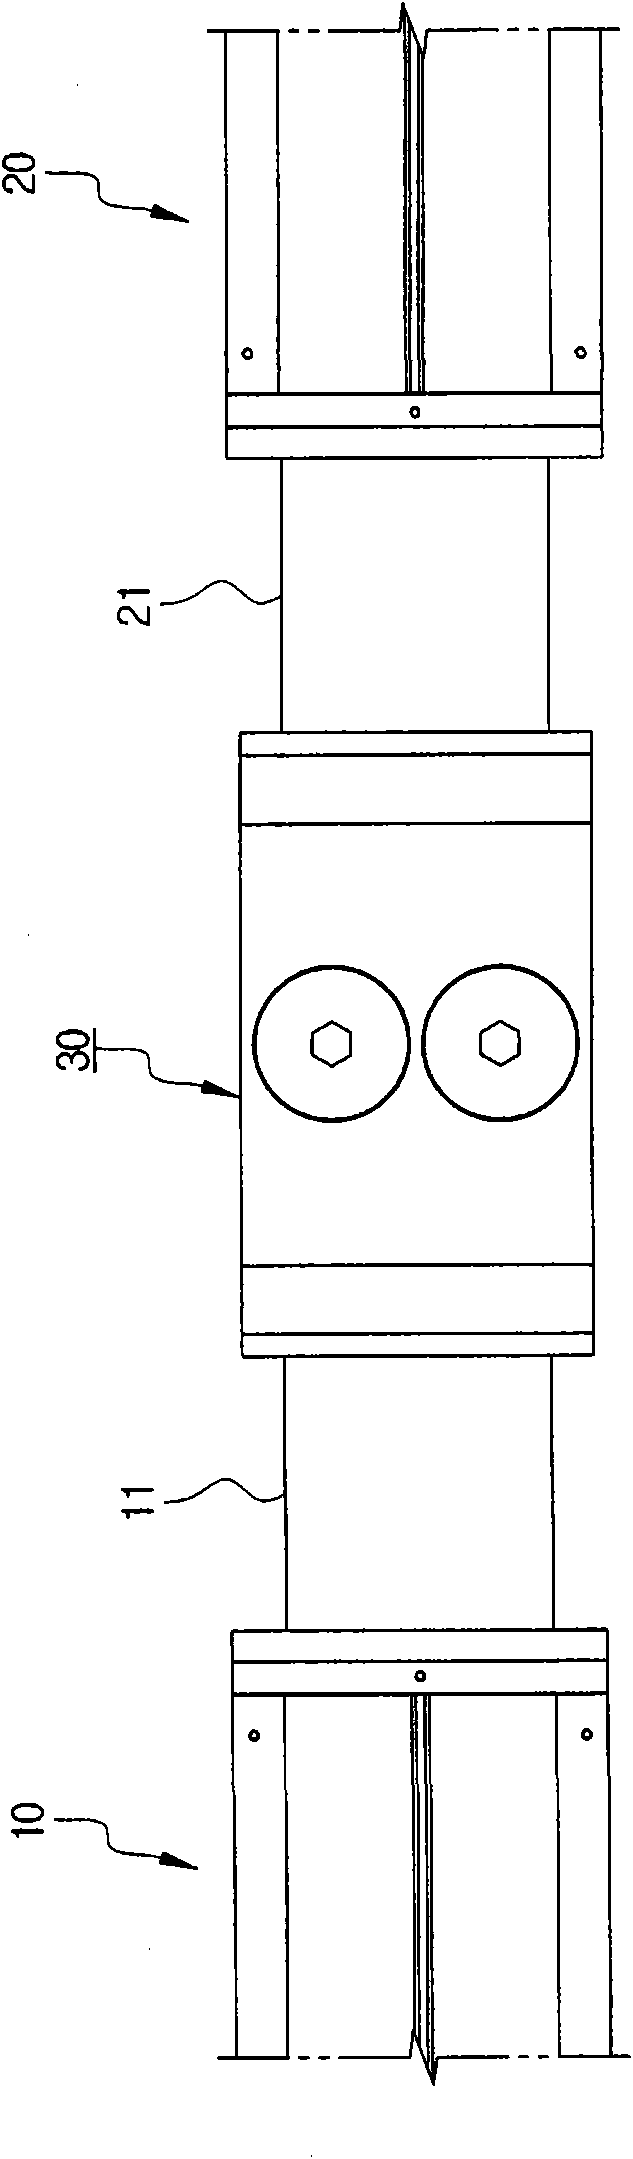 Transformable bus slot connector